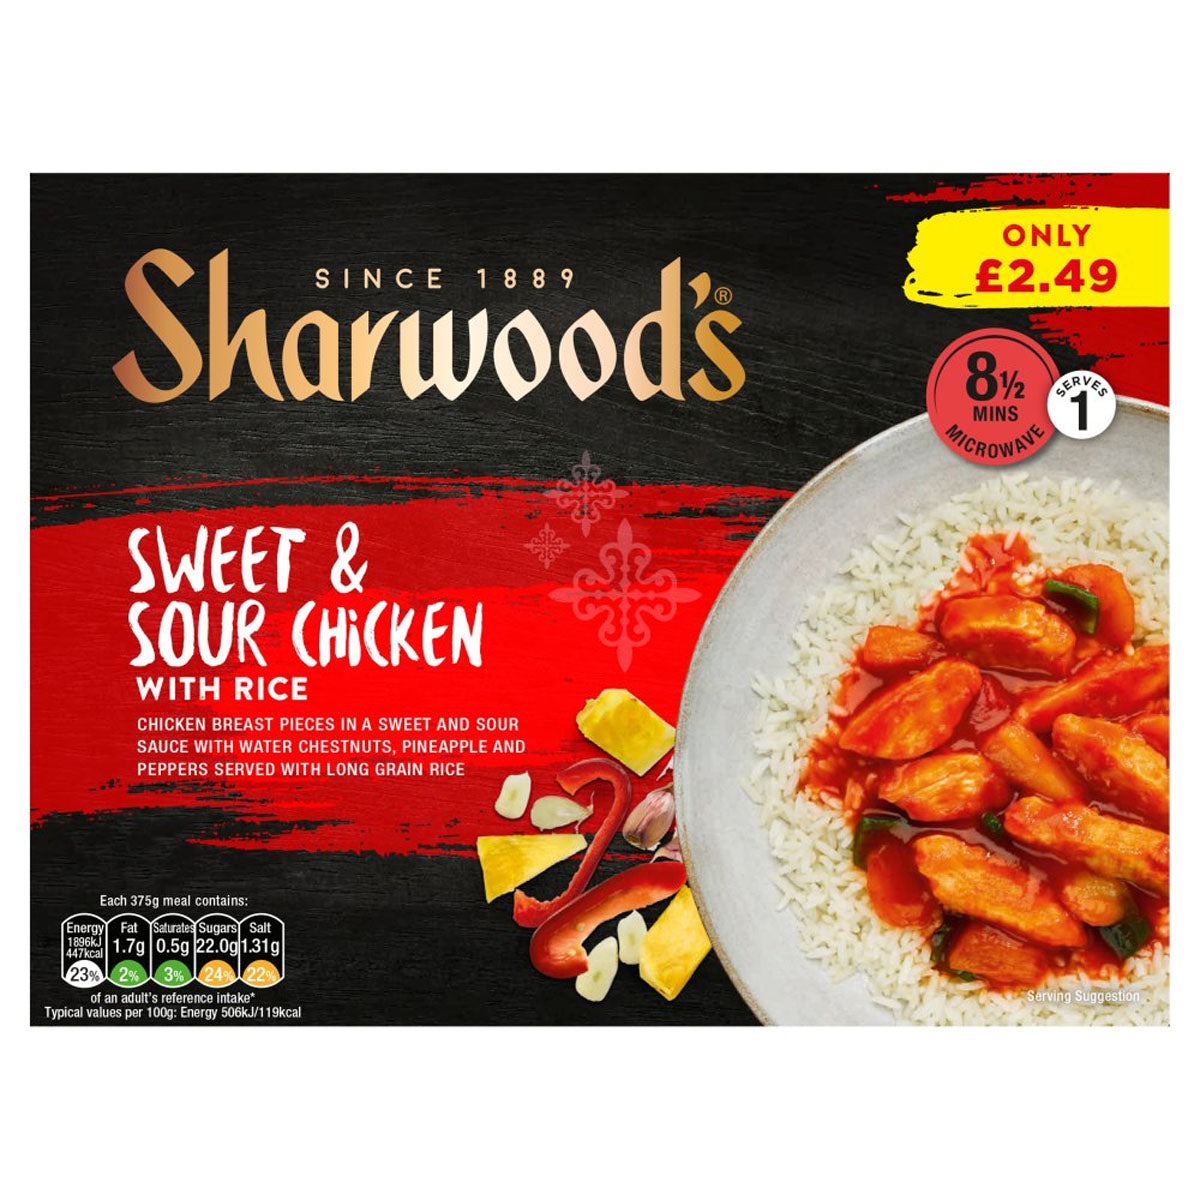 A box of Sharwoods - Sweet & Sour Chicken with Rice - 375g.